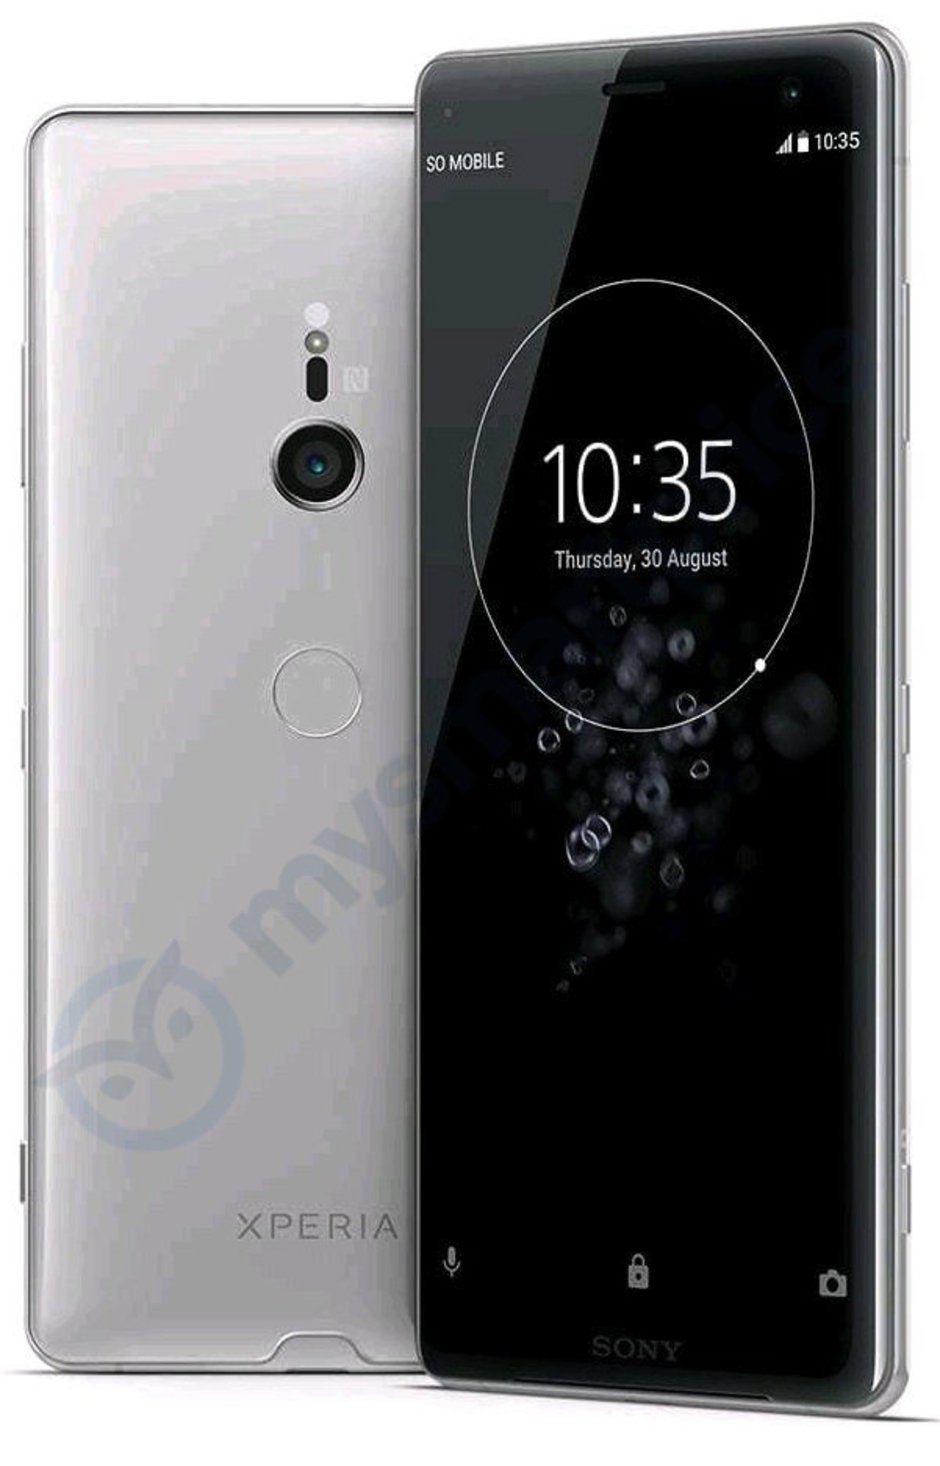 Sony Xperia XZ3 leaked press render shows off traditional display, glass-metal combo build